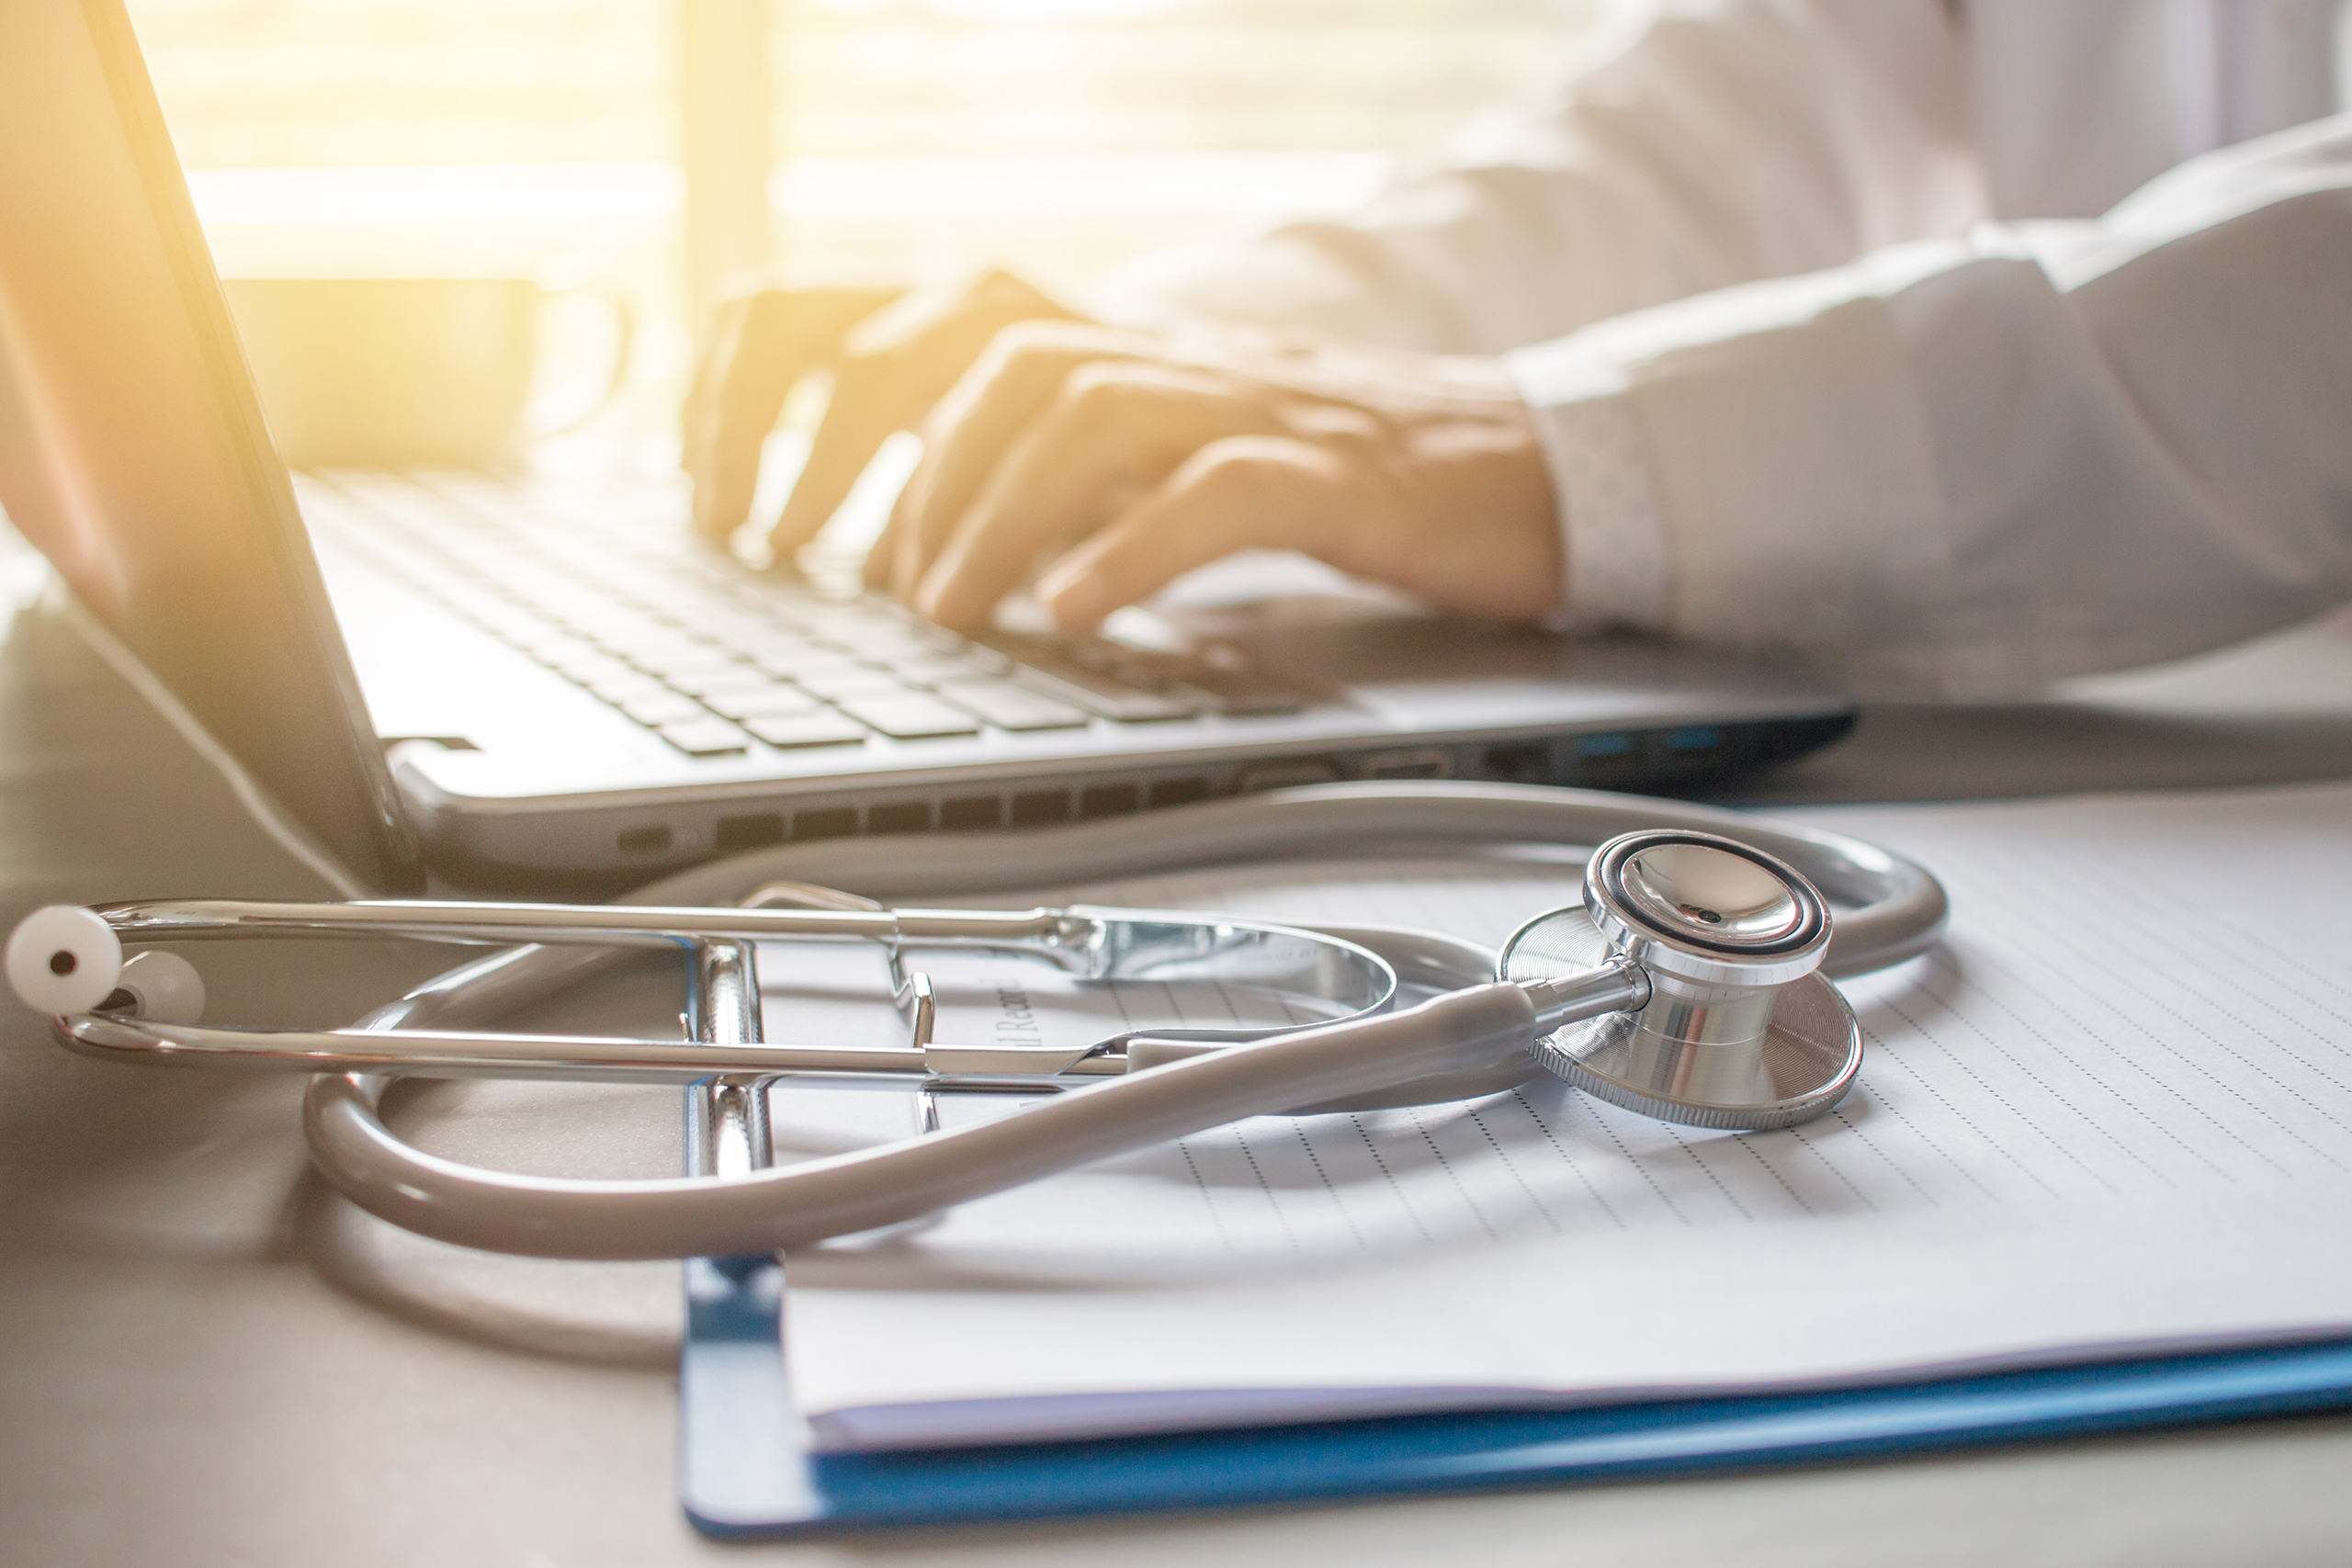 Stethoscope on prescription clipboard and Doctor working an Laptop on desk in hospital, Healthcare and medical concept, vintage color, selective focus